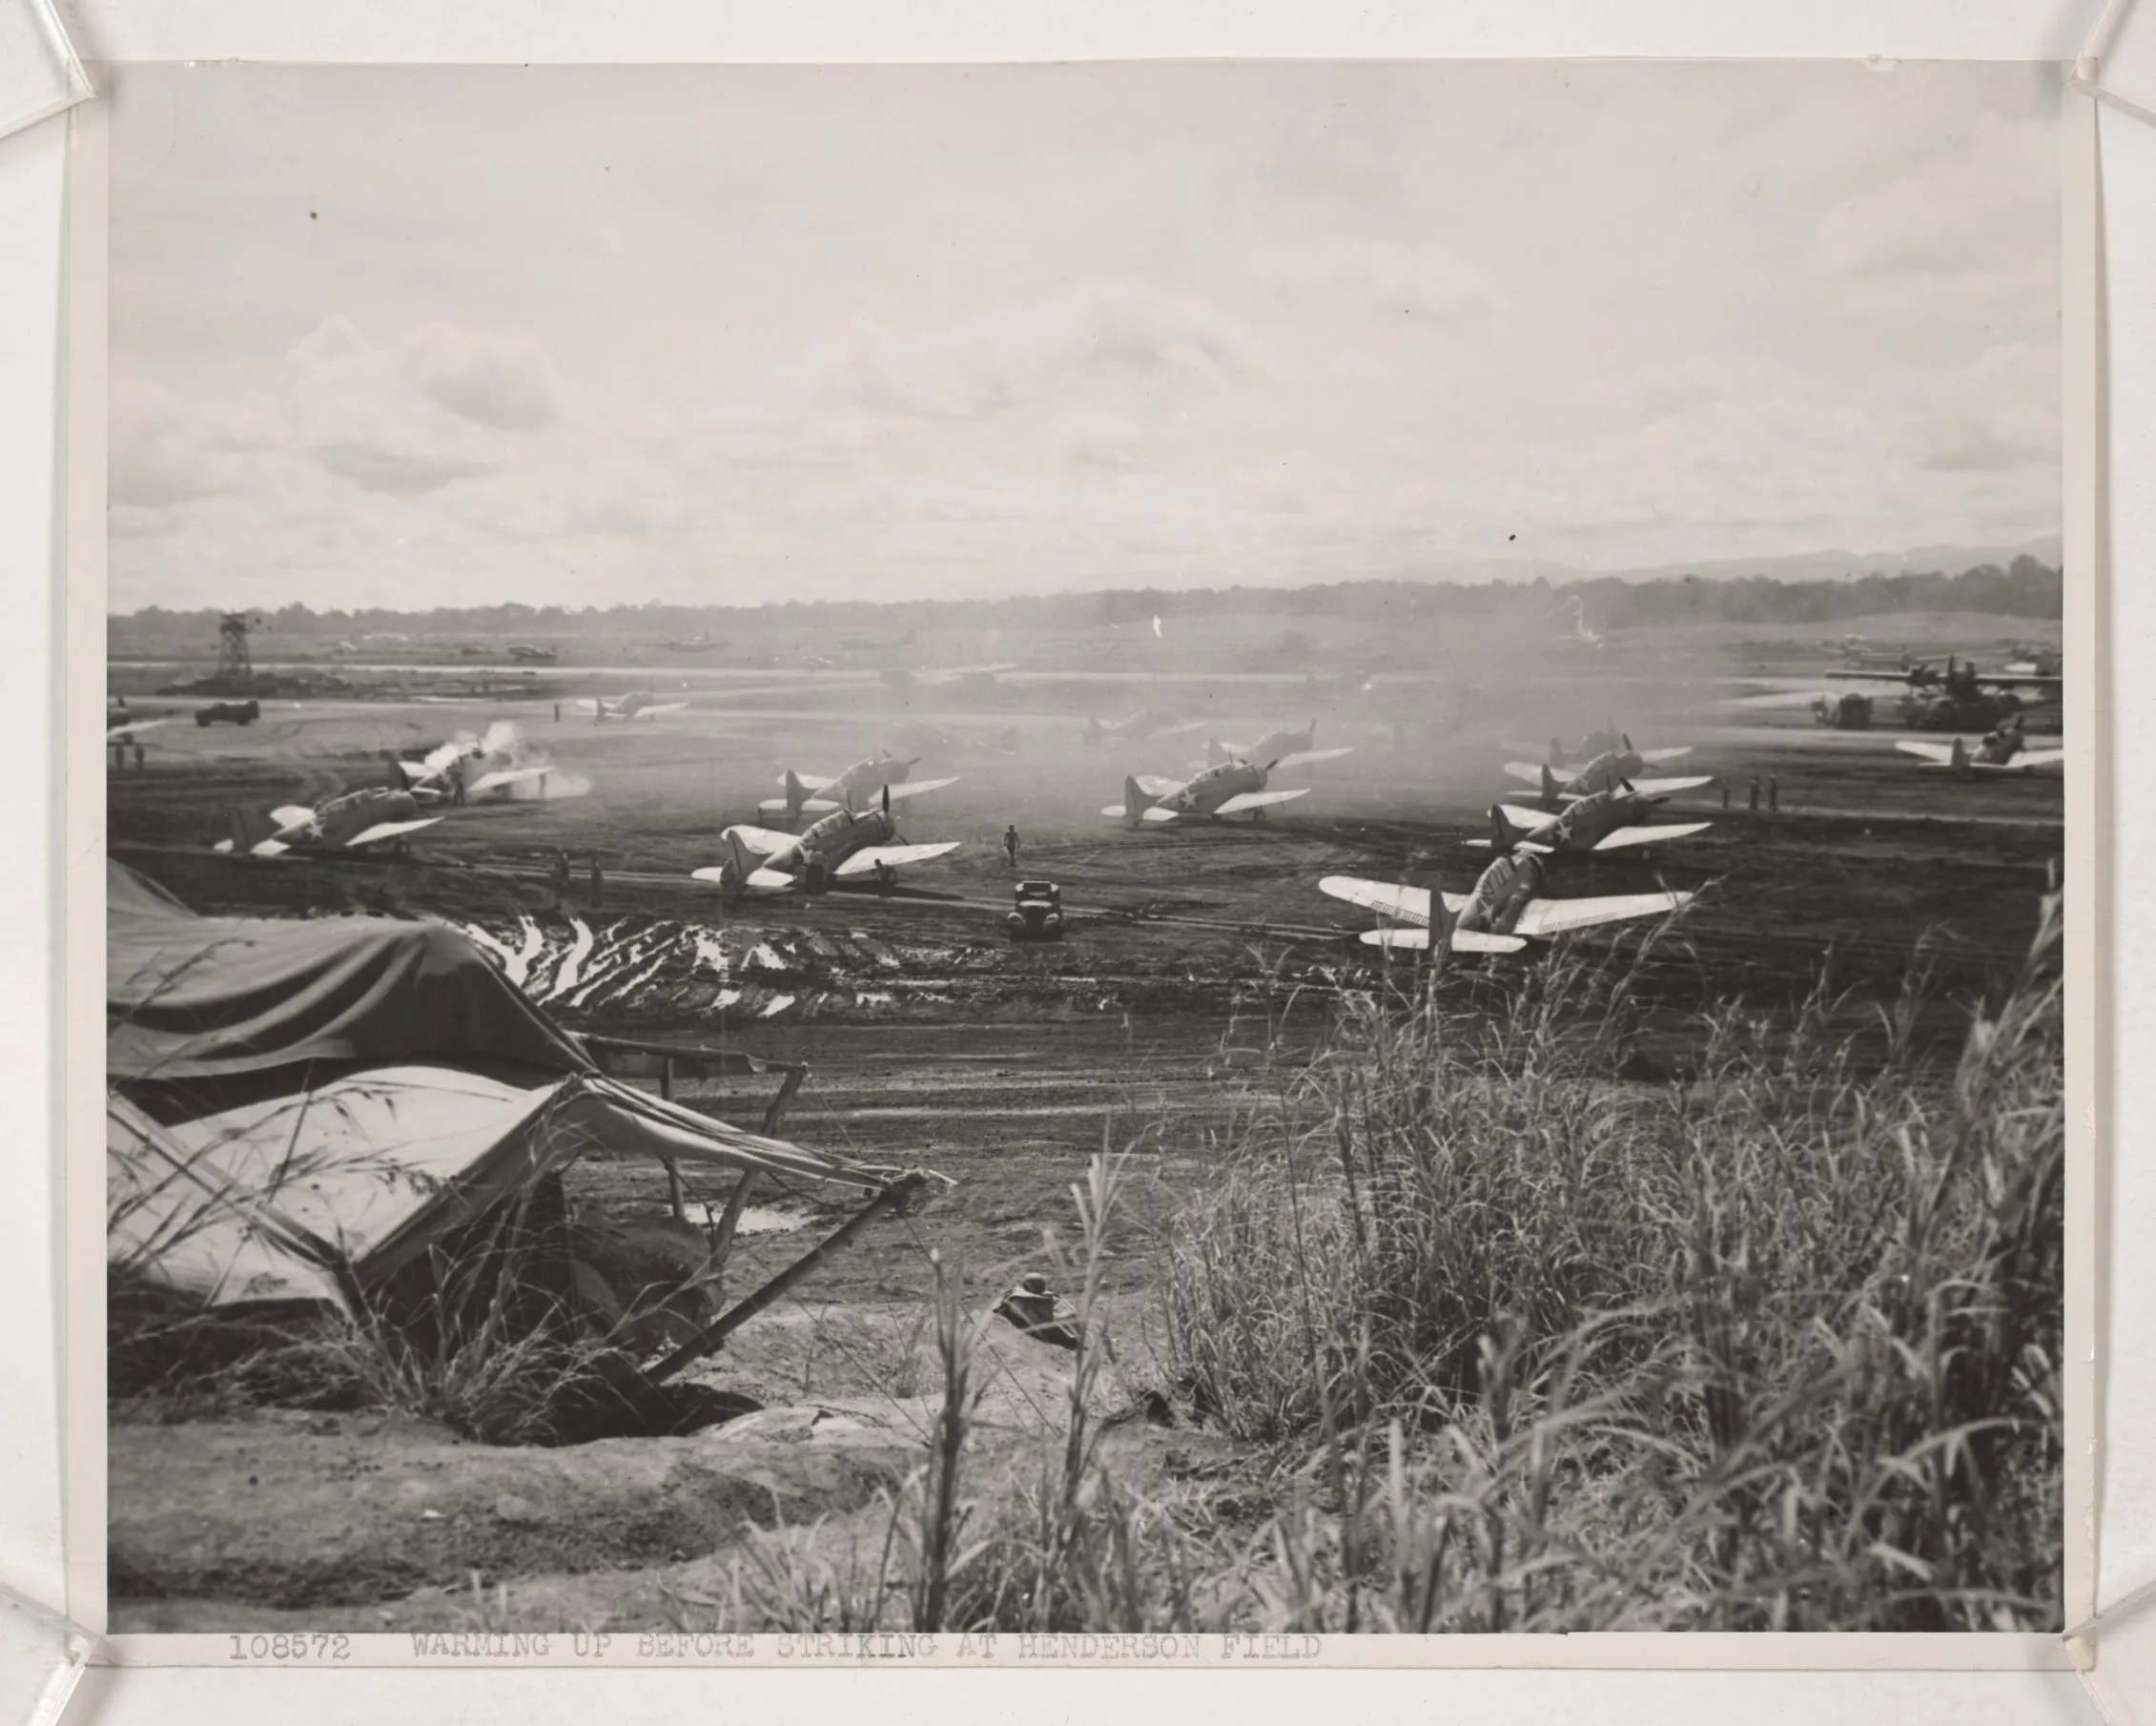 Guadalcanal, December 10, 1942. Marine SBD Squadron warms up before strike at Henderson Field during December 1942.